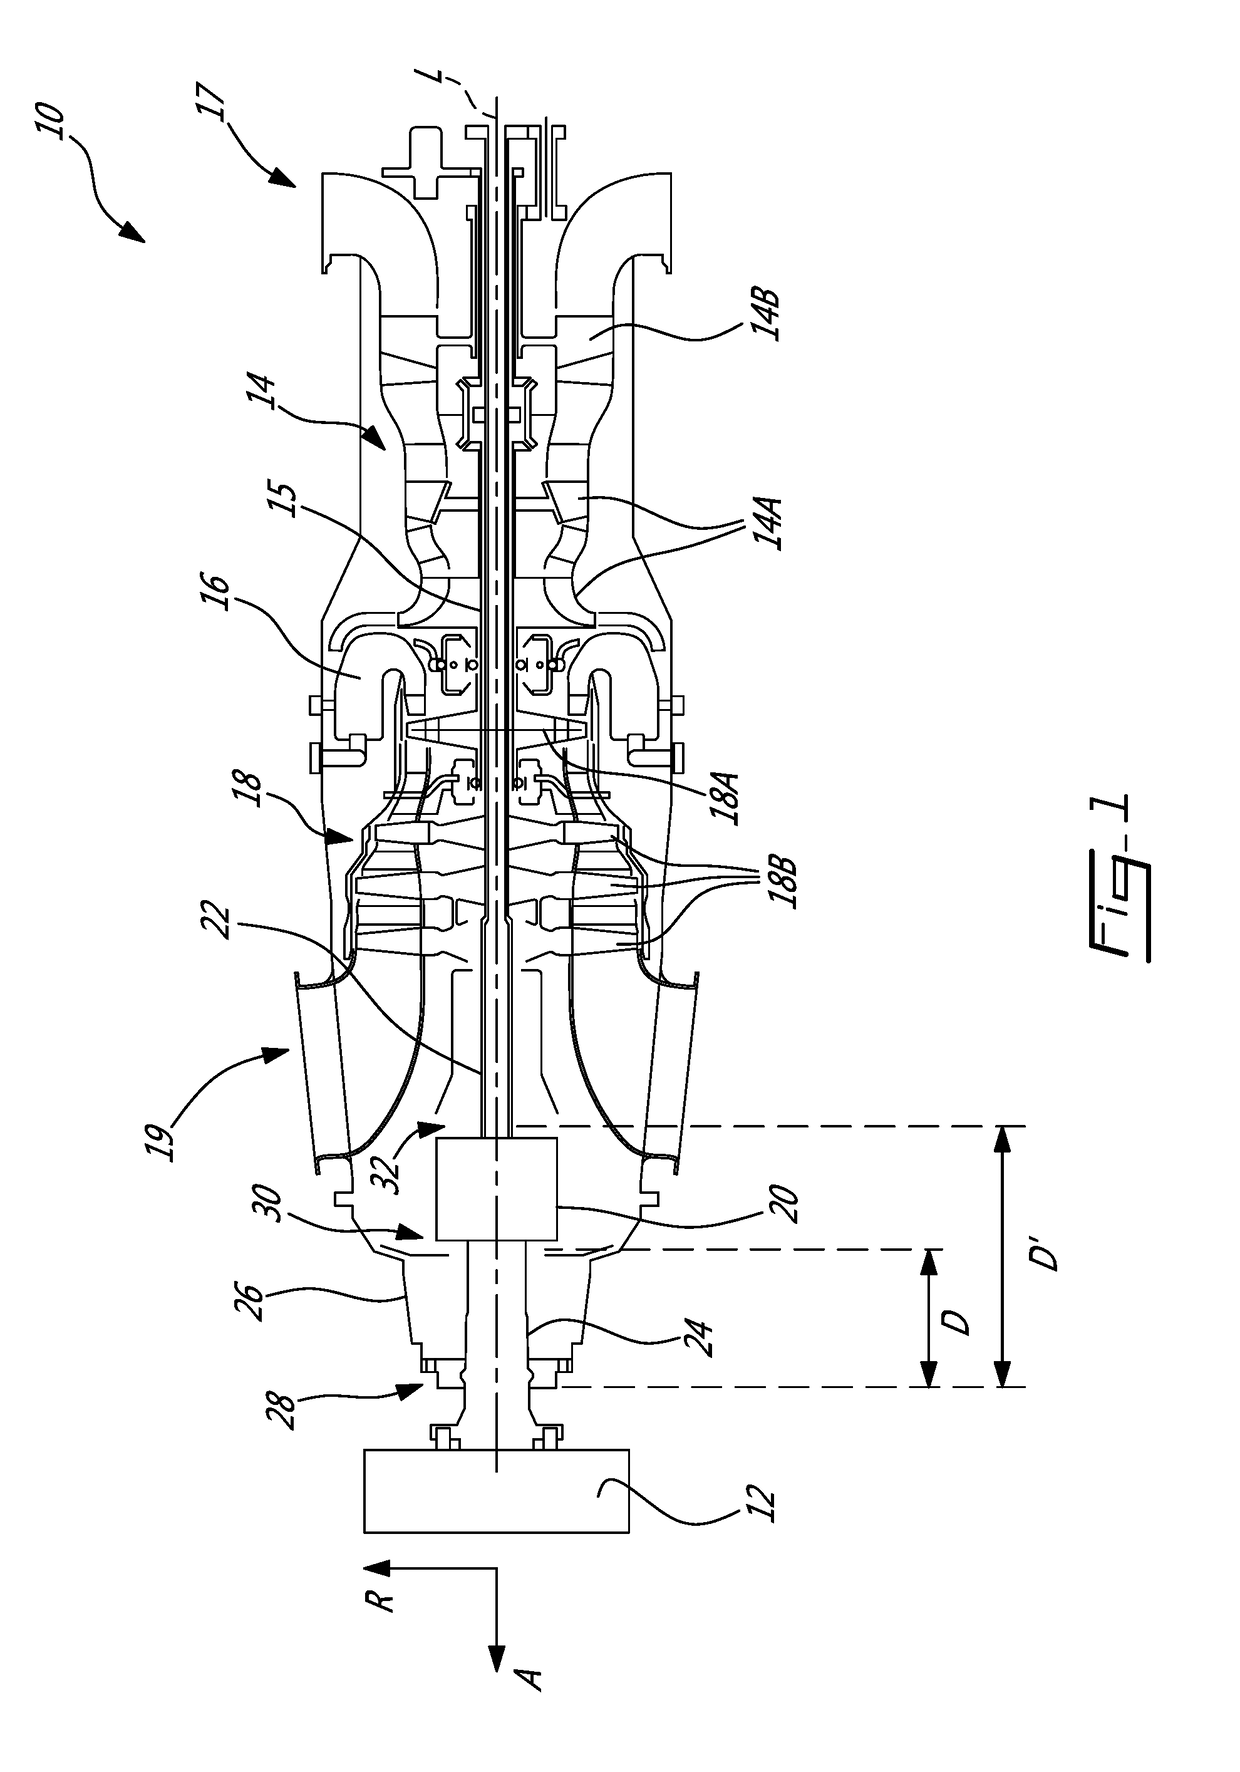 Support assembly for a propeller shaft